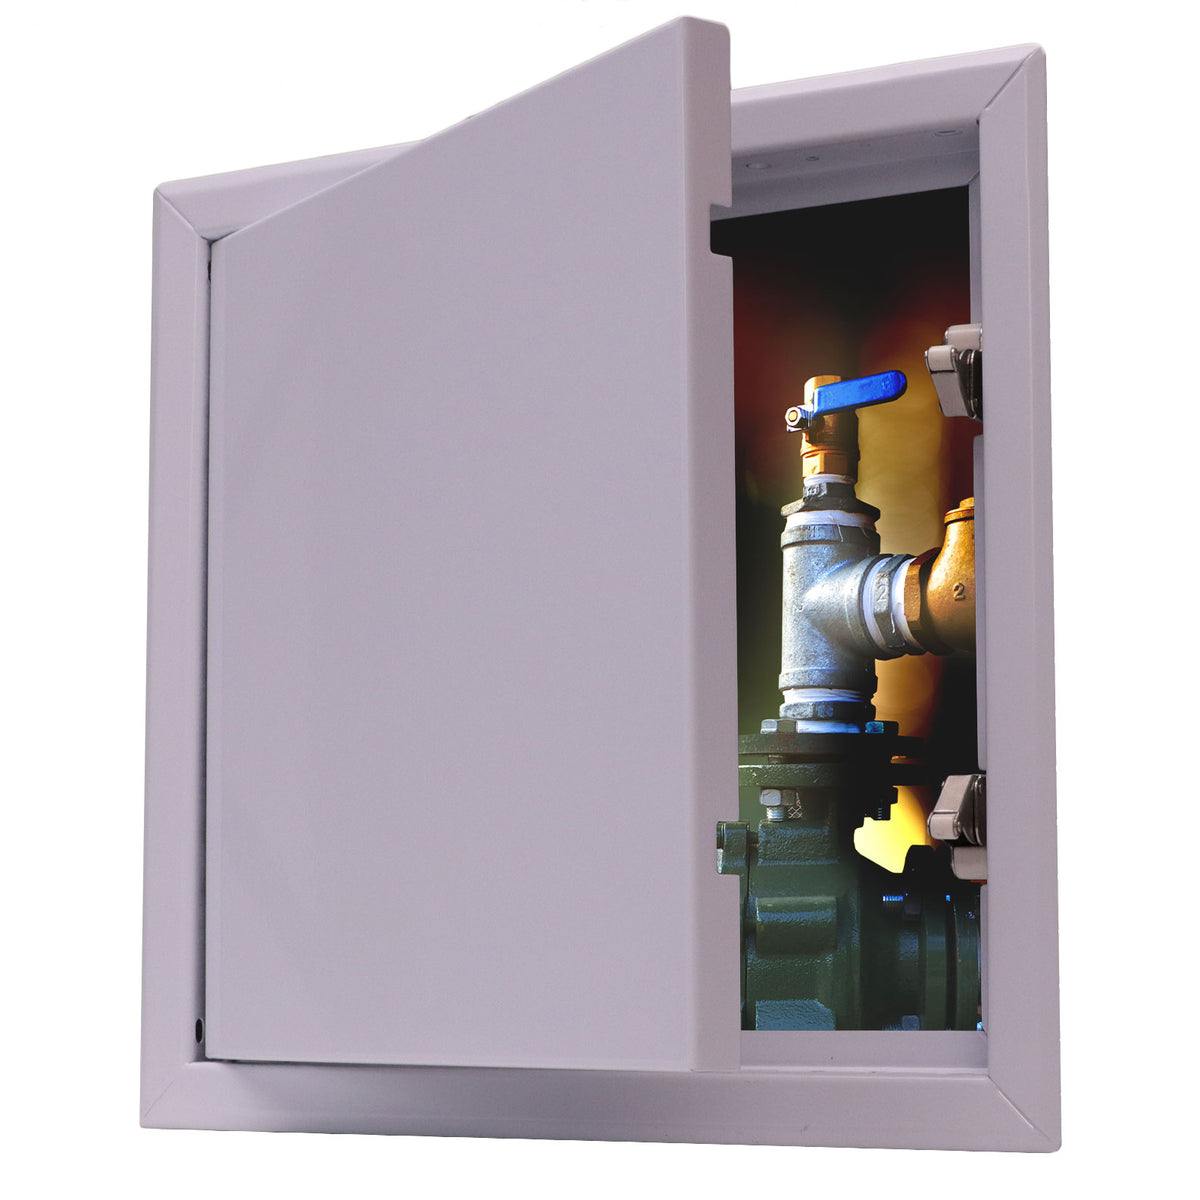 10&quot; X 10&quot; Universal Aluminum Access Panel Door For Wall / Ceiling Application (Push-Lock) With Solid Frame - [Outer Dimensions: 11&quot; Width X 11&quot; Height]